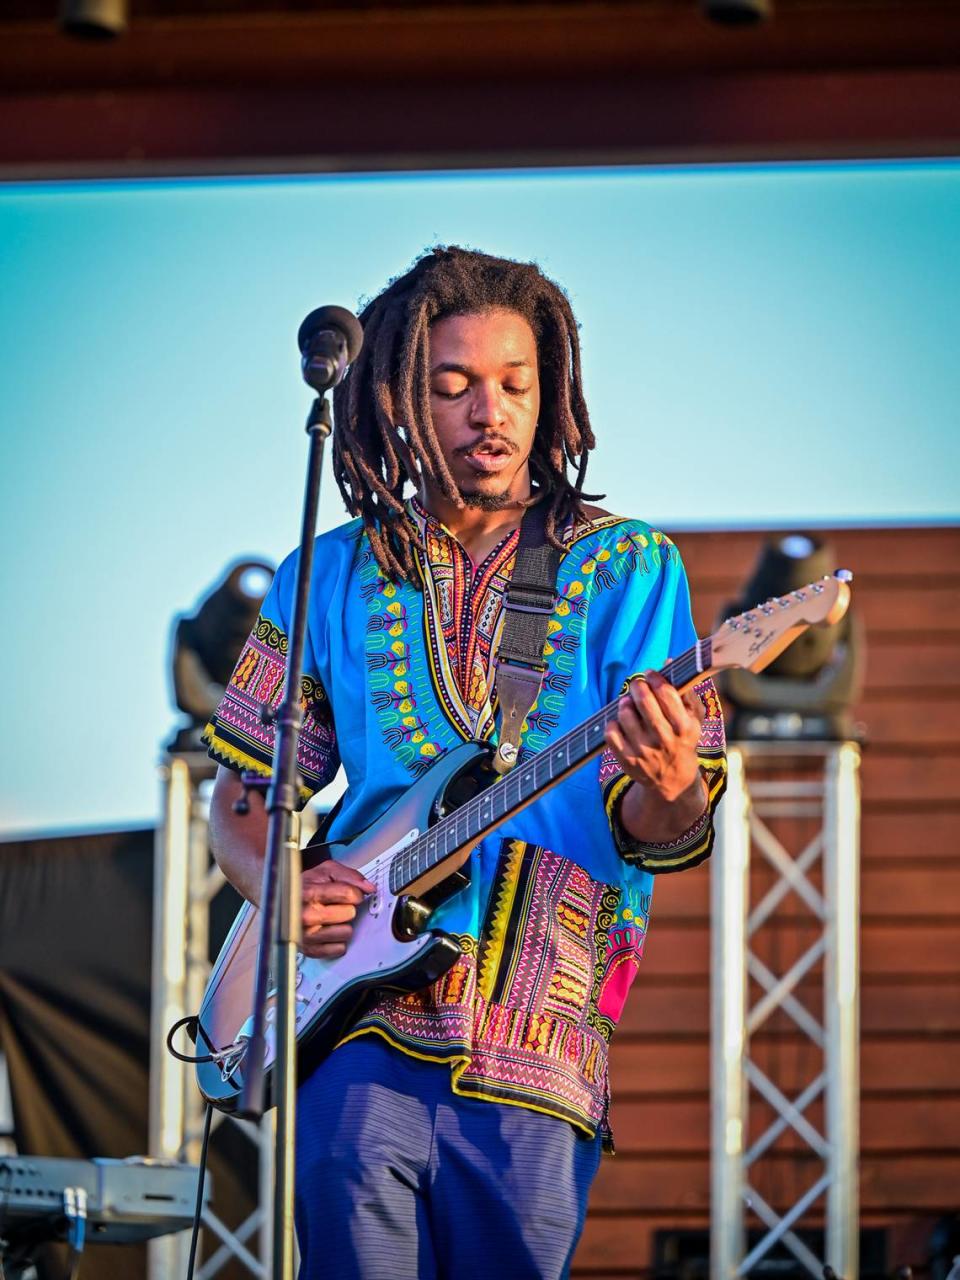 The Jamaican Jam, coming July 14, is the second in a series of free concerts at Lee’s Summit Parks & Recreation’s annual Rock the Amp.